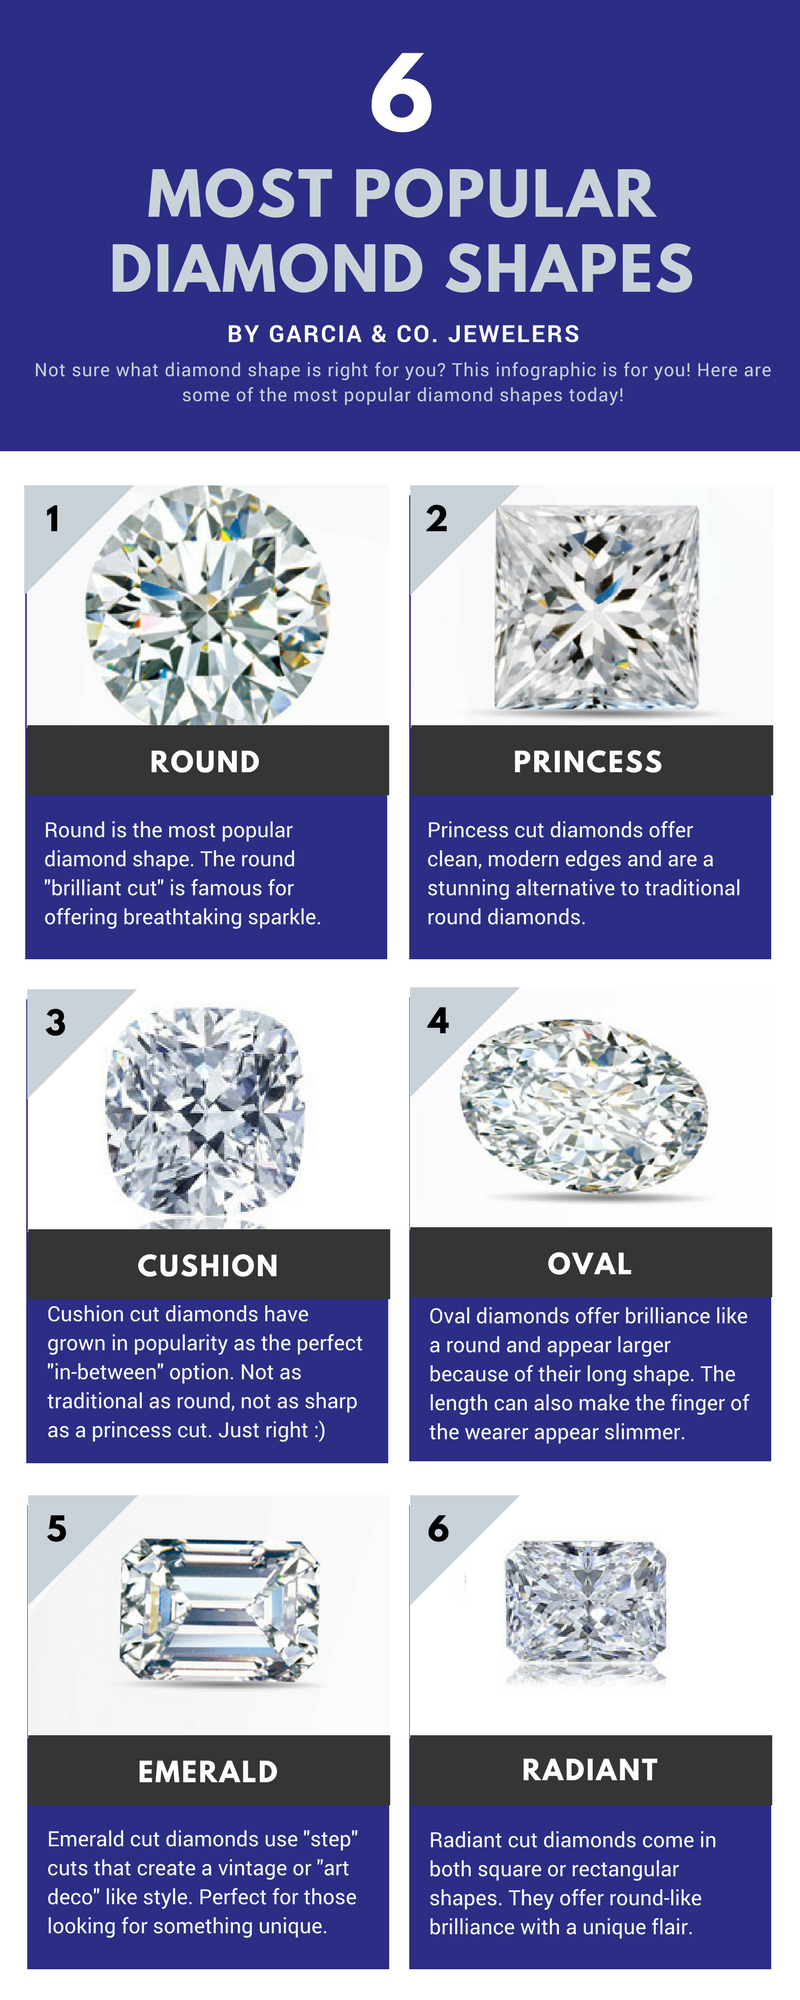 Different Diamond Shapes: 3 Tips For Choosing The Right Diamond Shape For You [w/ Infographic!]